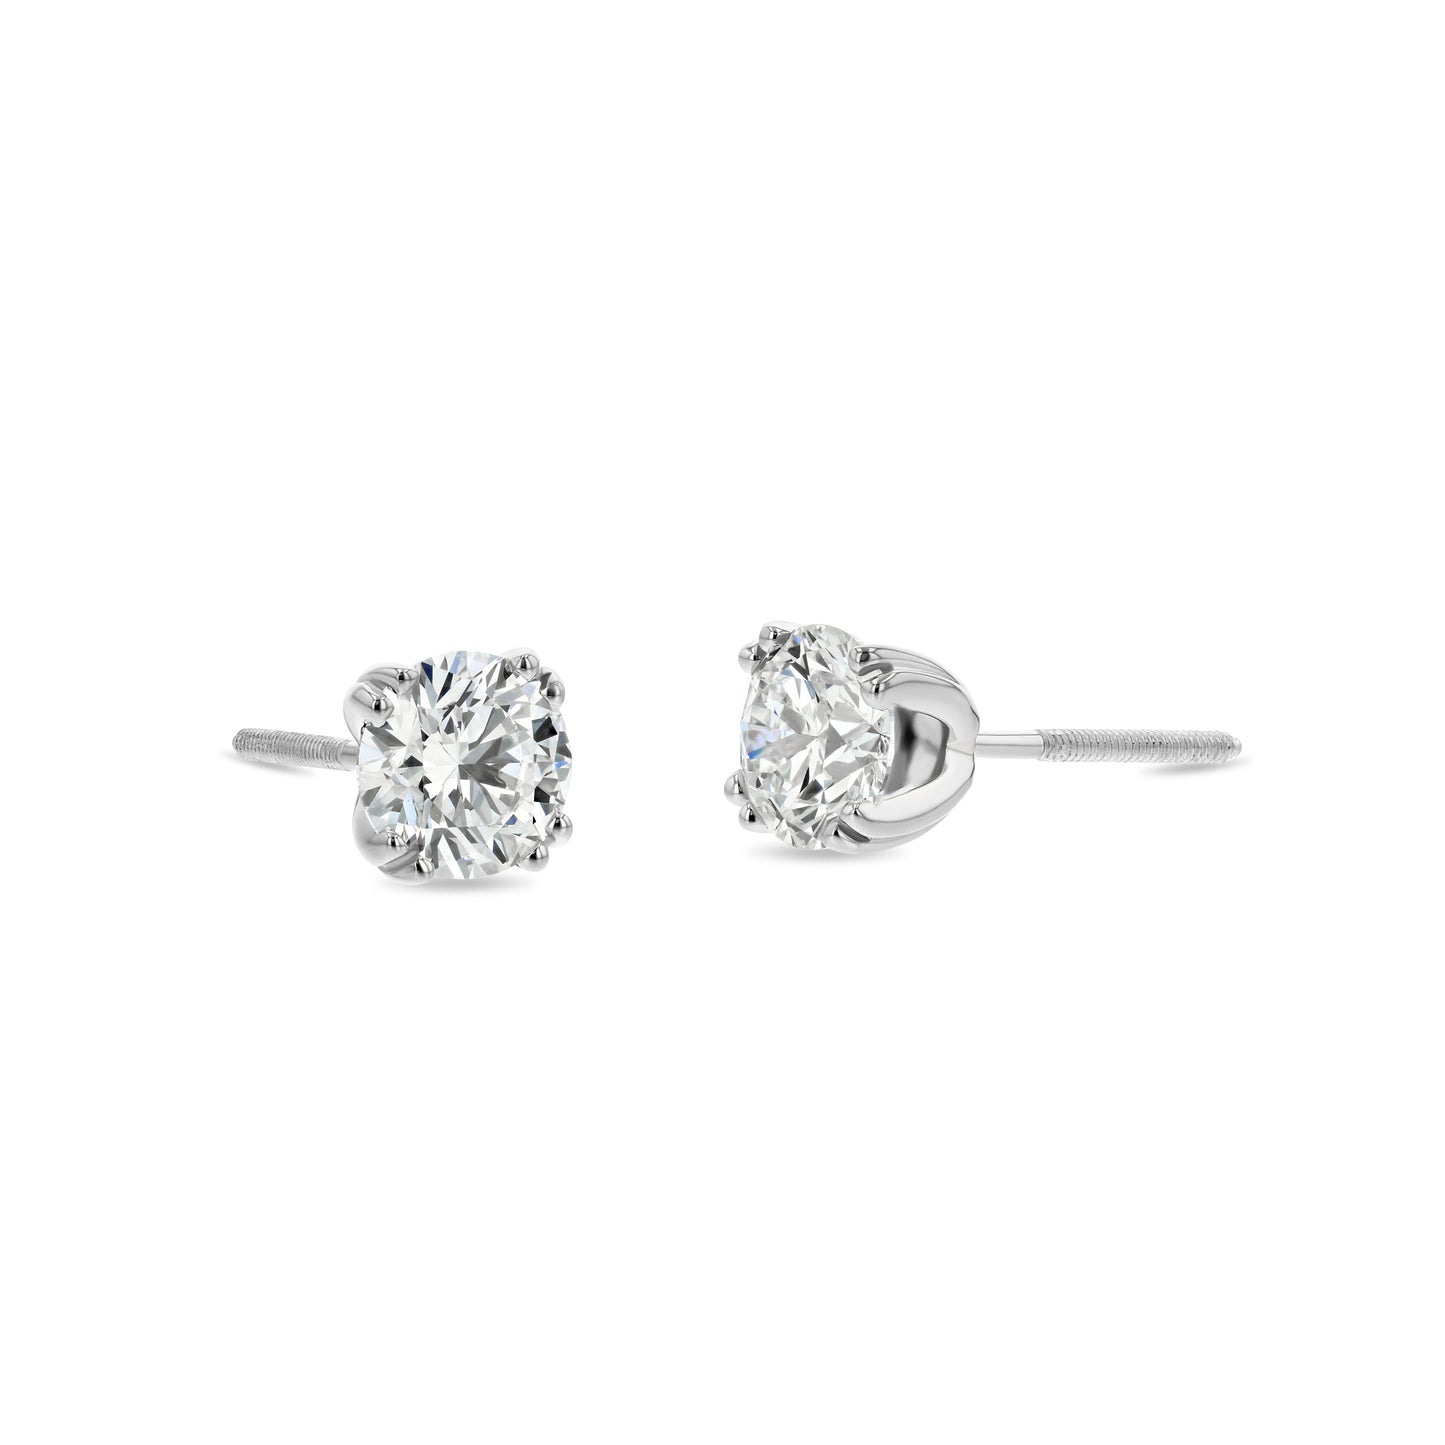 14k White Gold Double Prong Round Diamond Stud Earrings 1/2ctw (4.1mm Ea), M-n Color, Si2-si3 Clarity